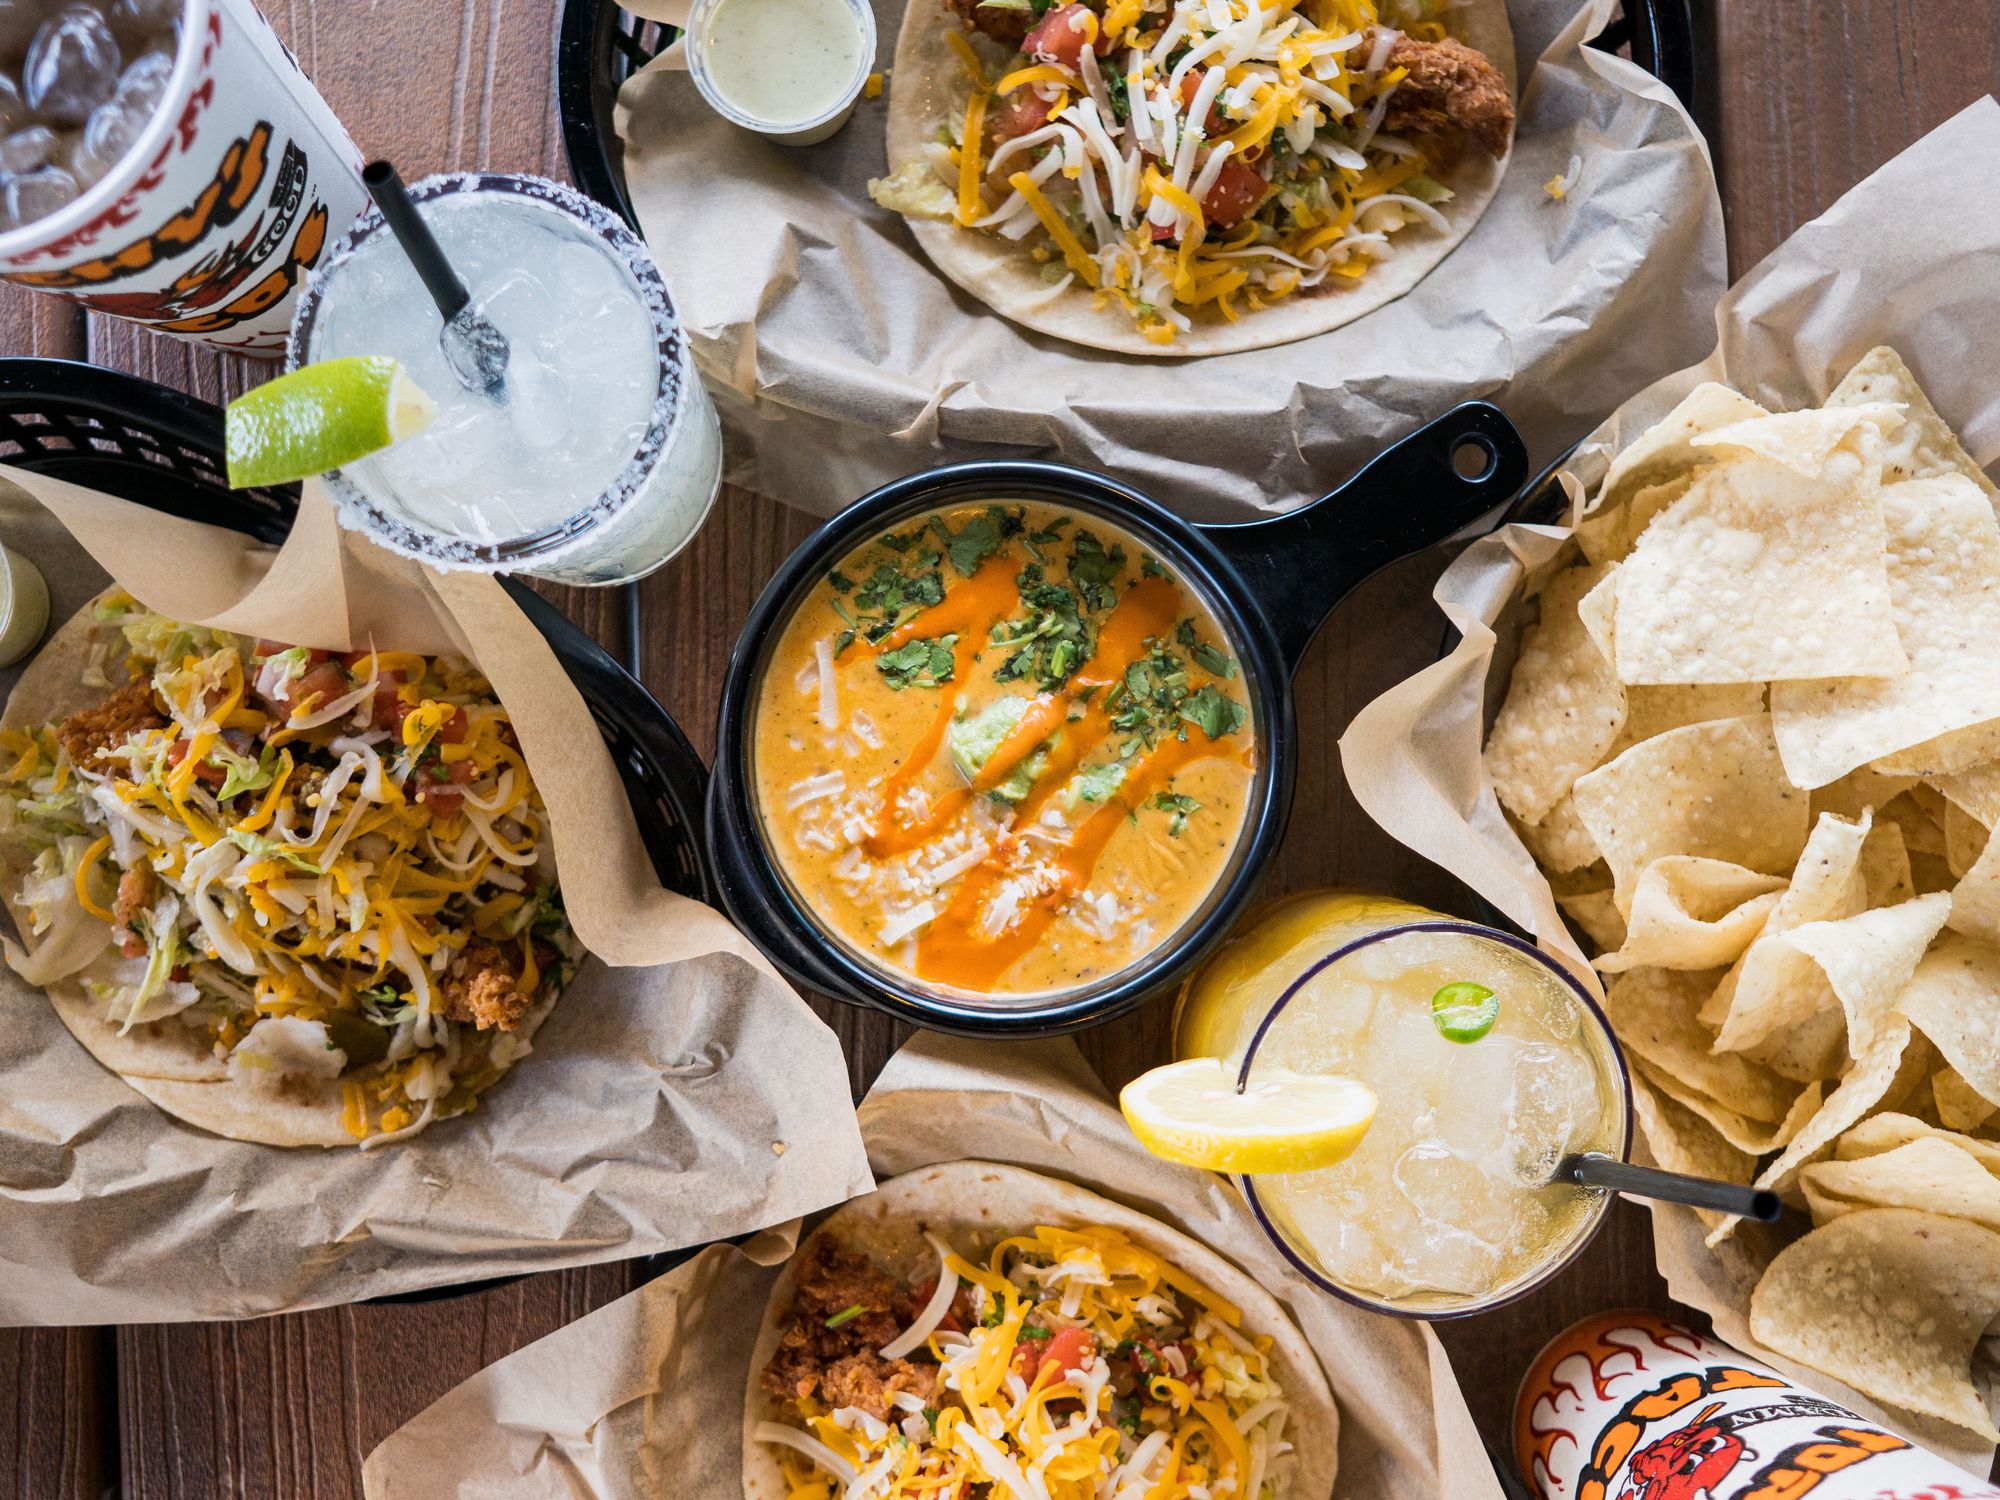 A spread of tacos, queso and beverages at Torchy's Tacos.